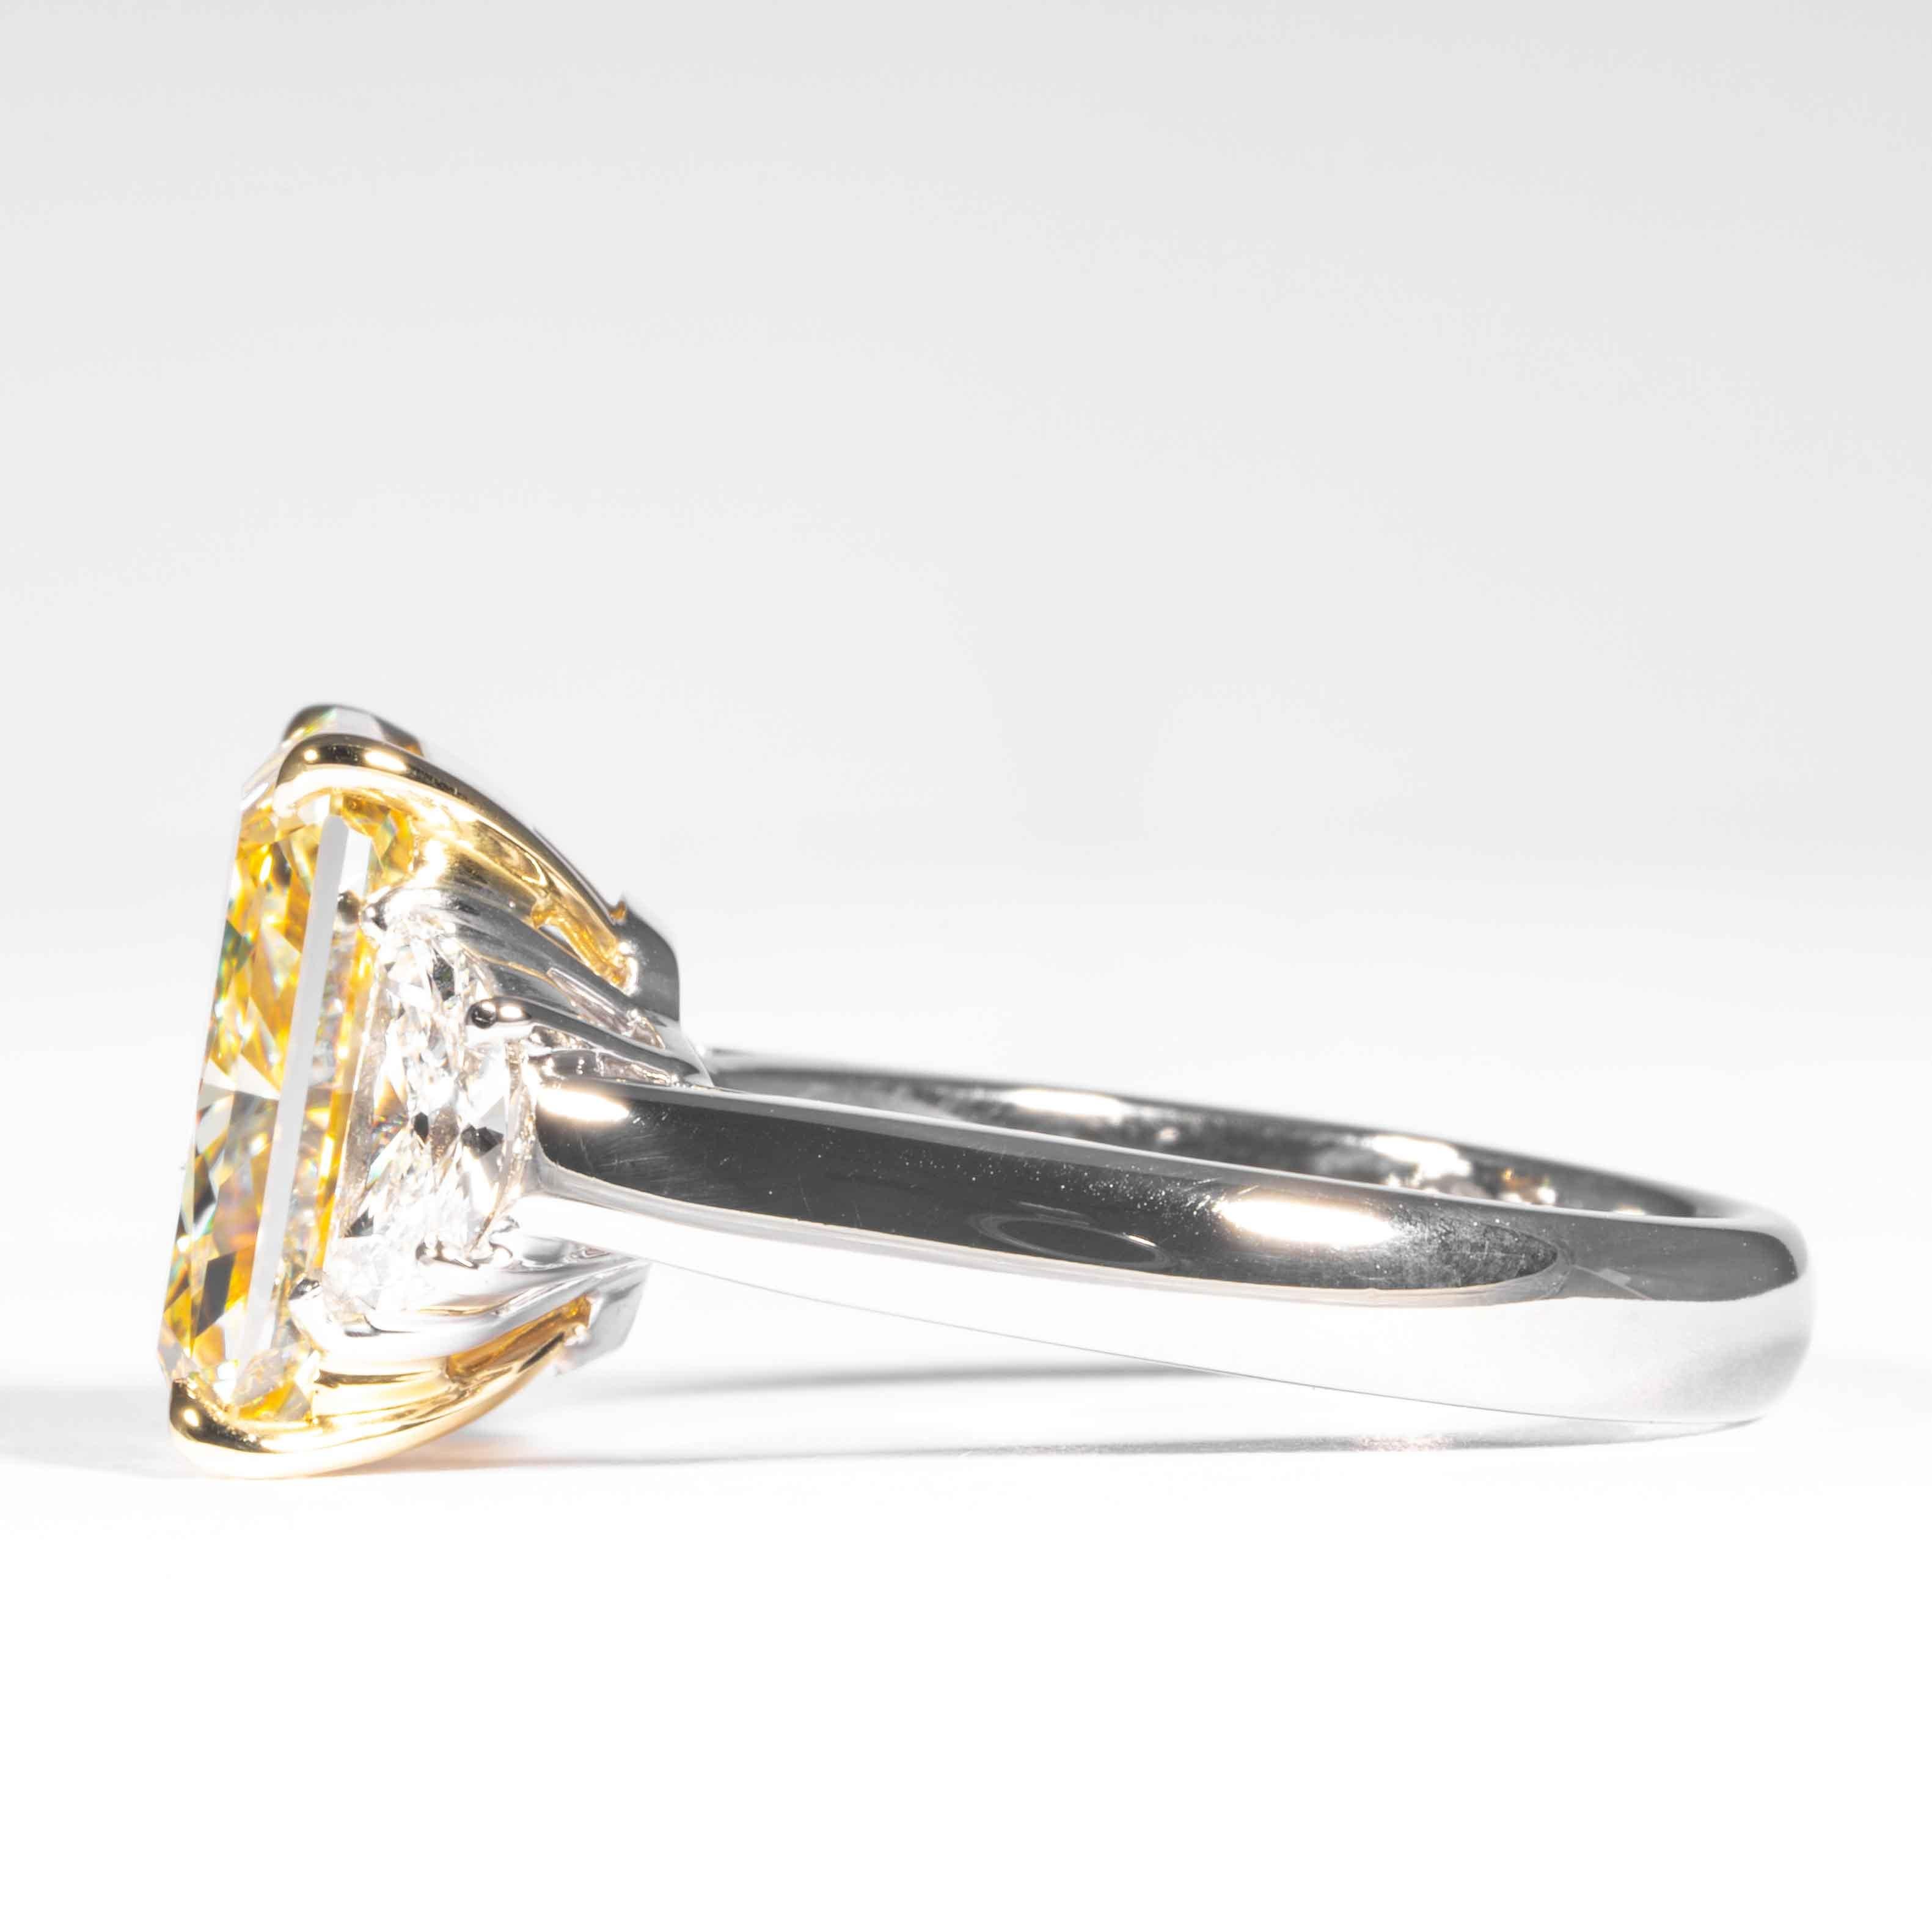 Shreve, Crump & Low GIA Certified 5.87 Carat Fancy Yellow Radiant Diamond Ring In New Condition For Sale In Boston, MA